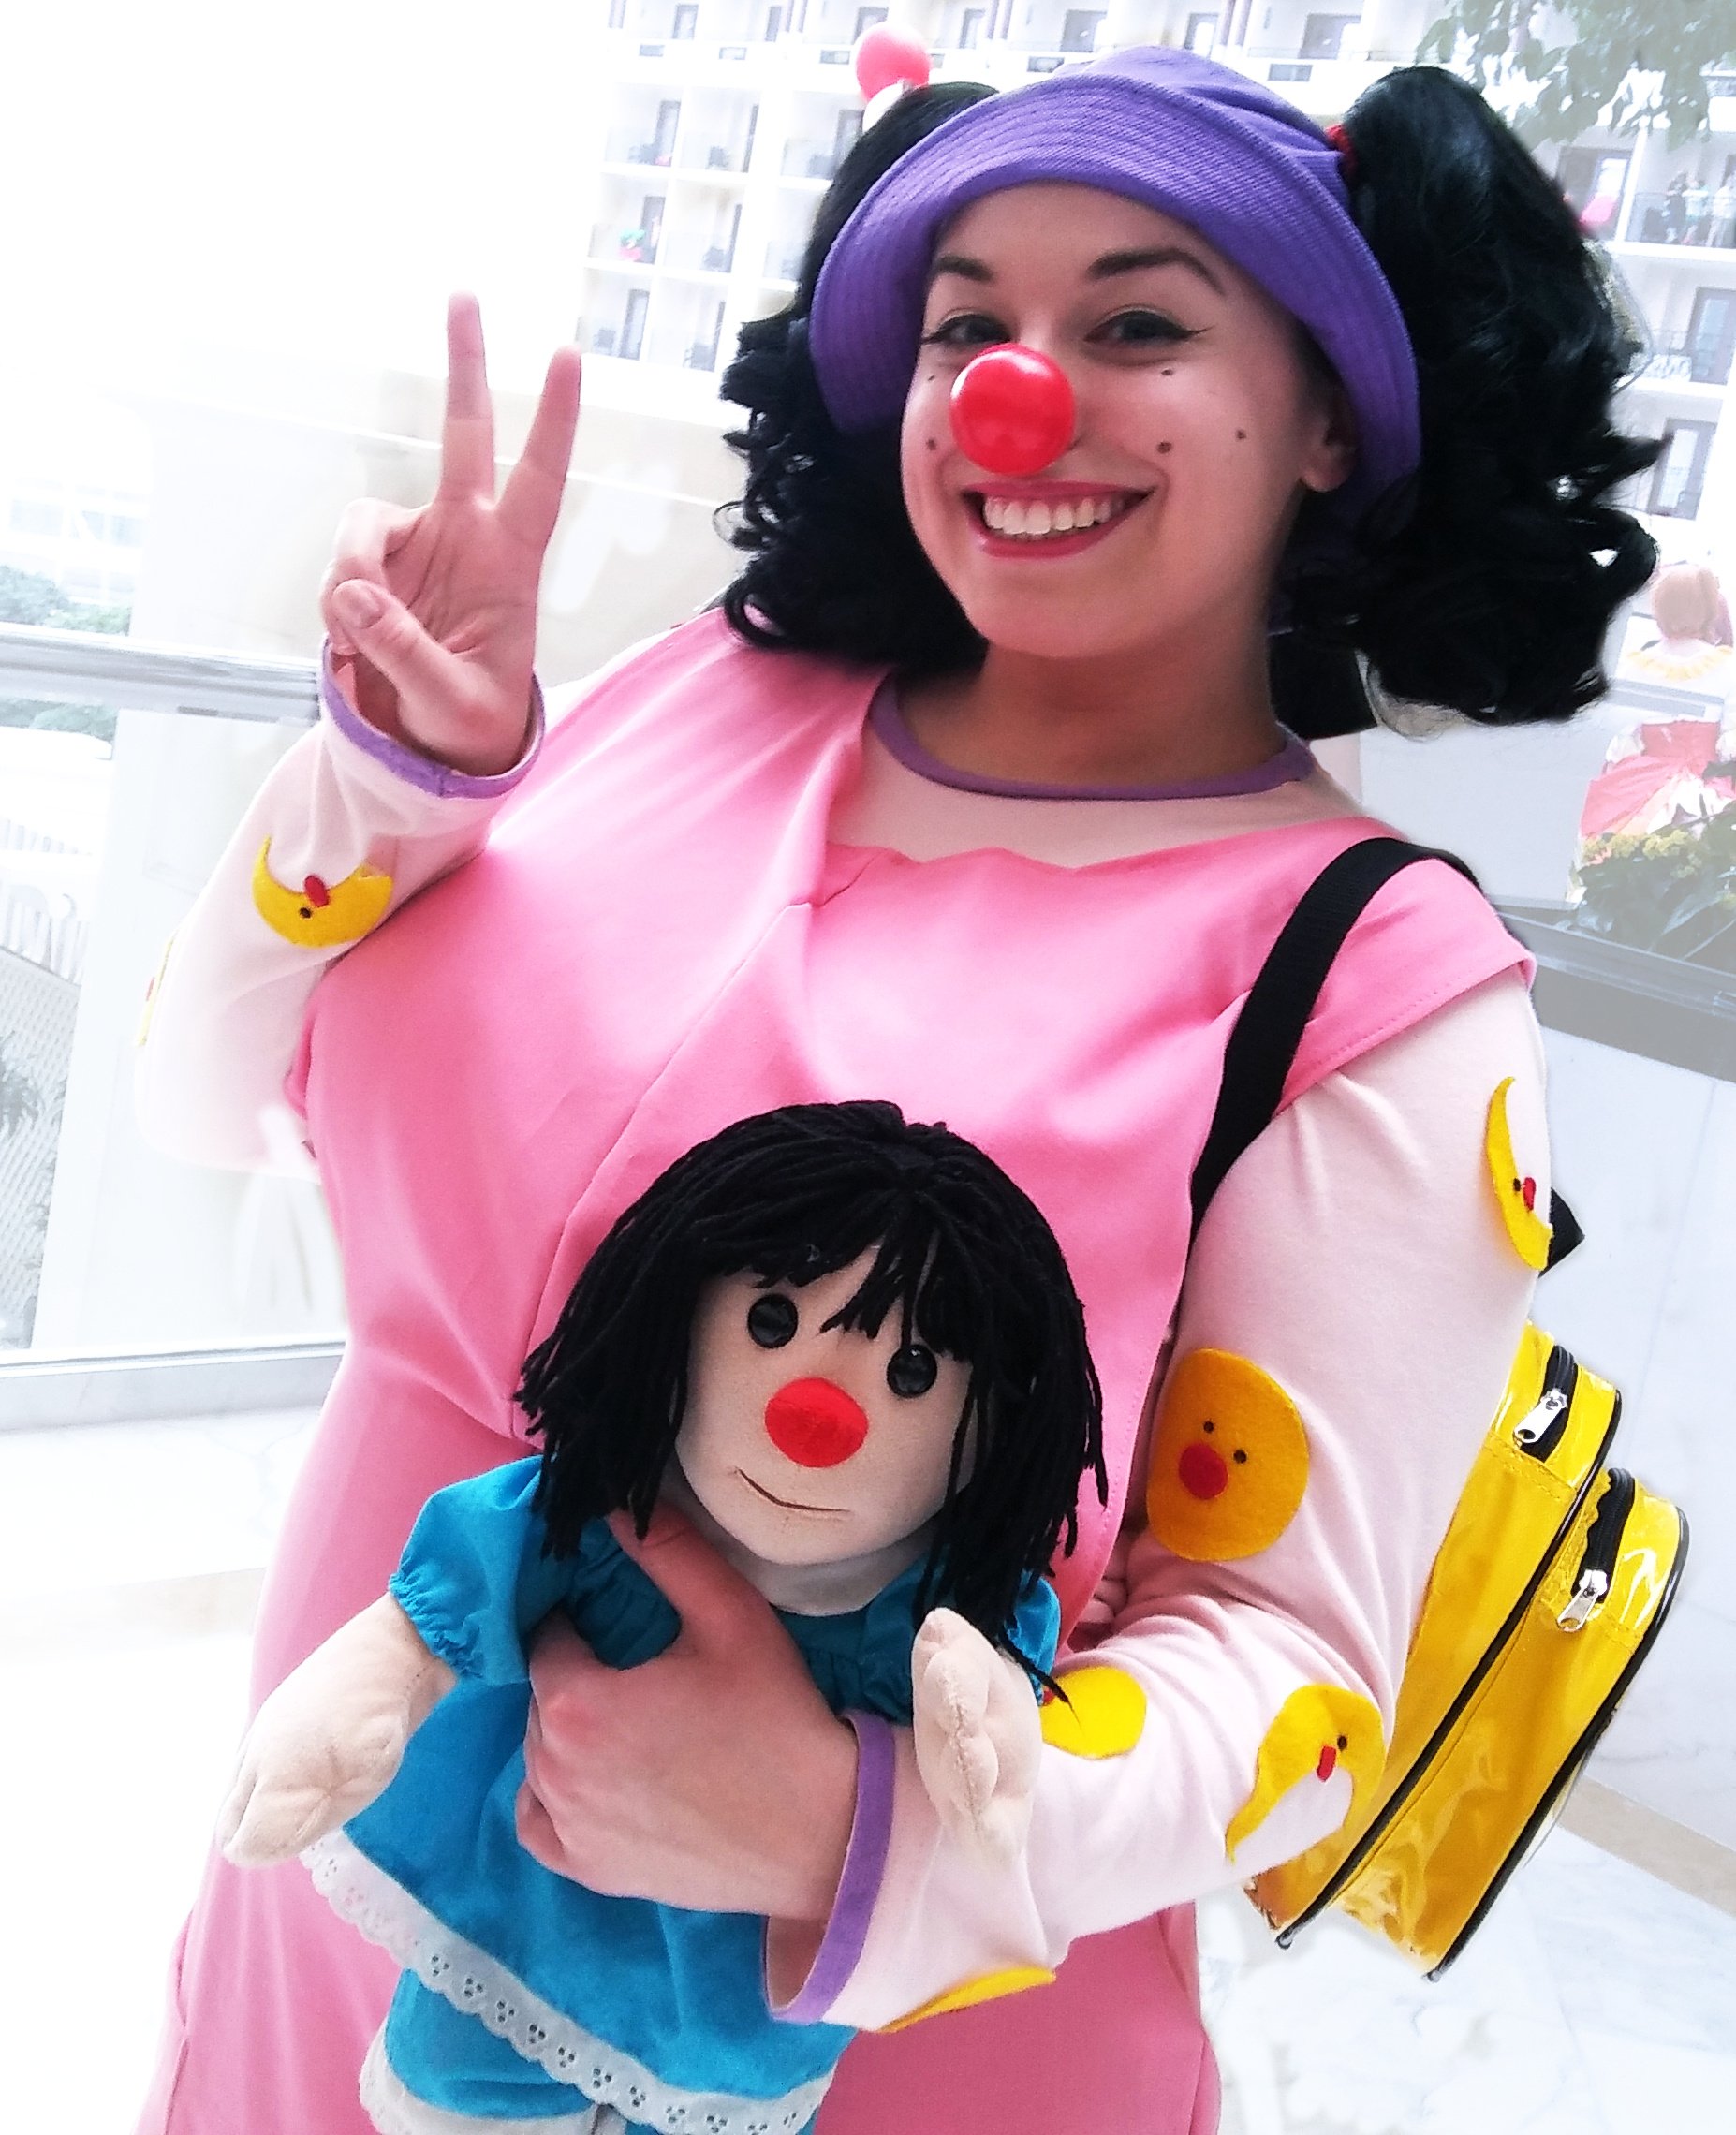 Big comfy now the couch molly from Do you